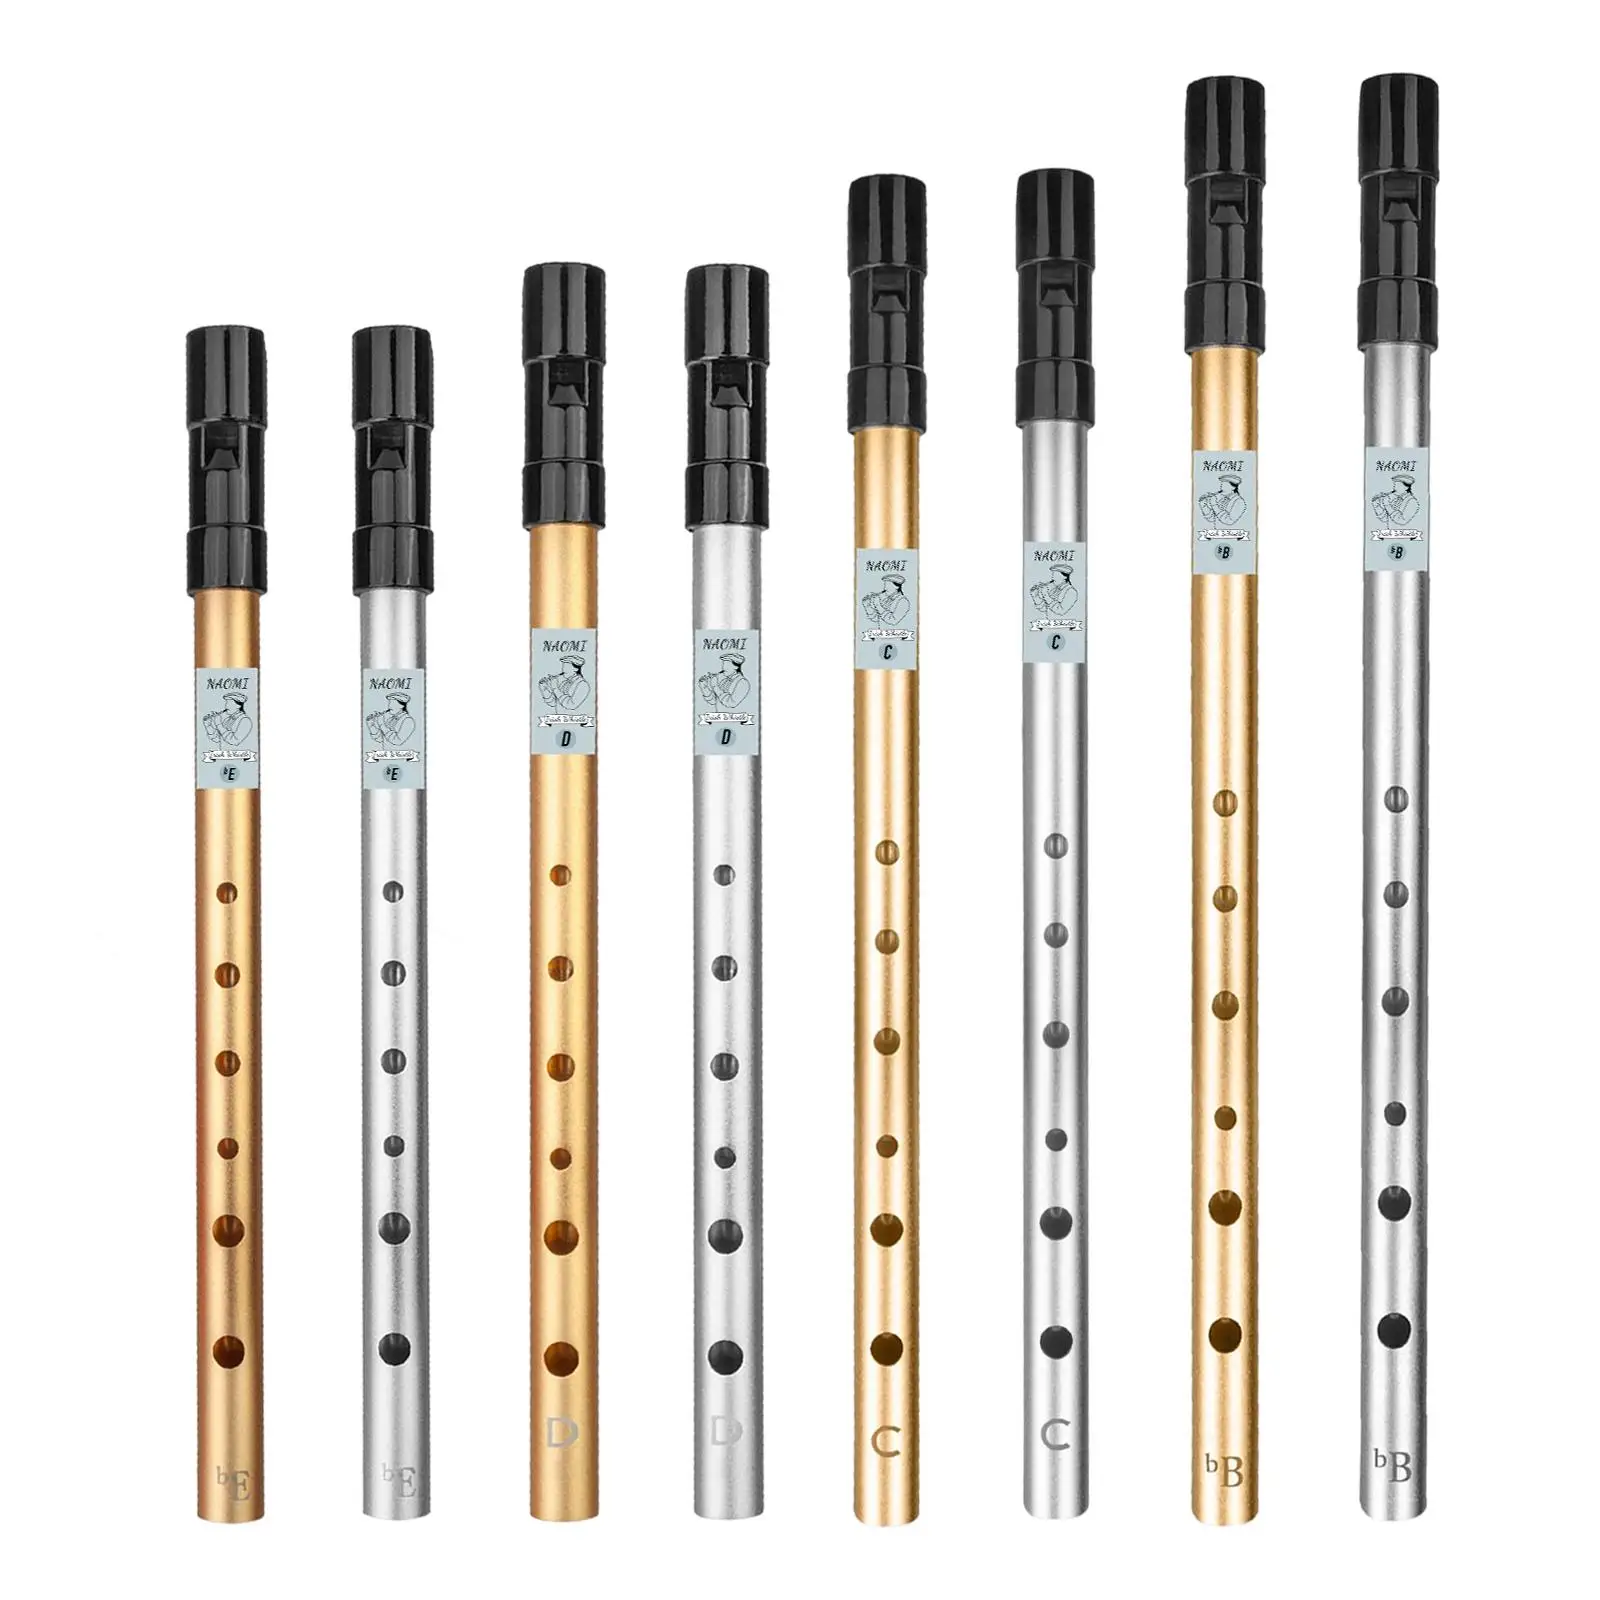 

Portable Tin Whistle 6 Holes Music Instrument Easy to Learn Flute Whistling Penny Whistle for Beginners Kids Intermediates